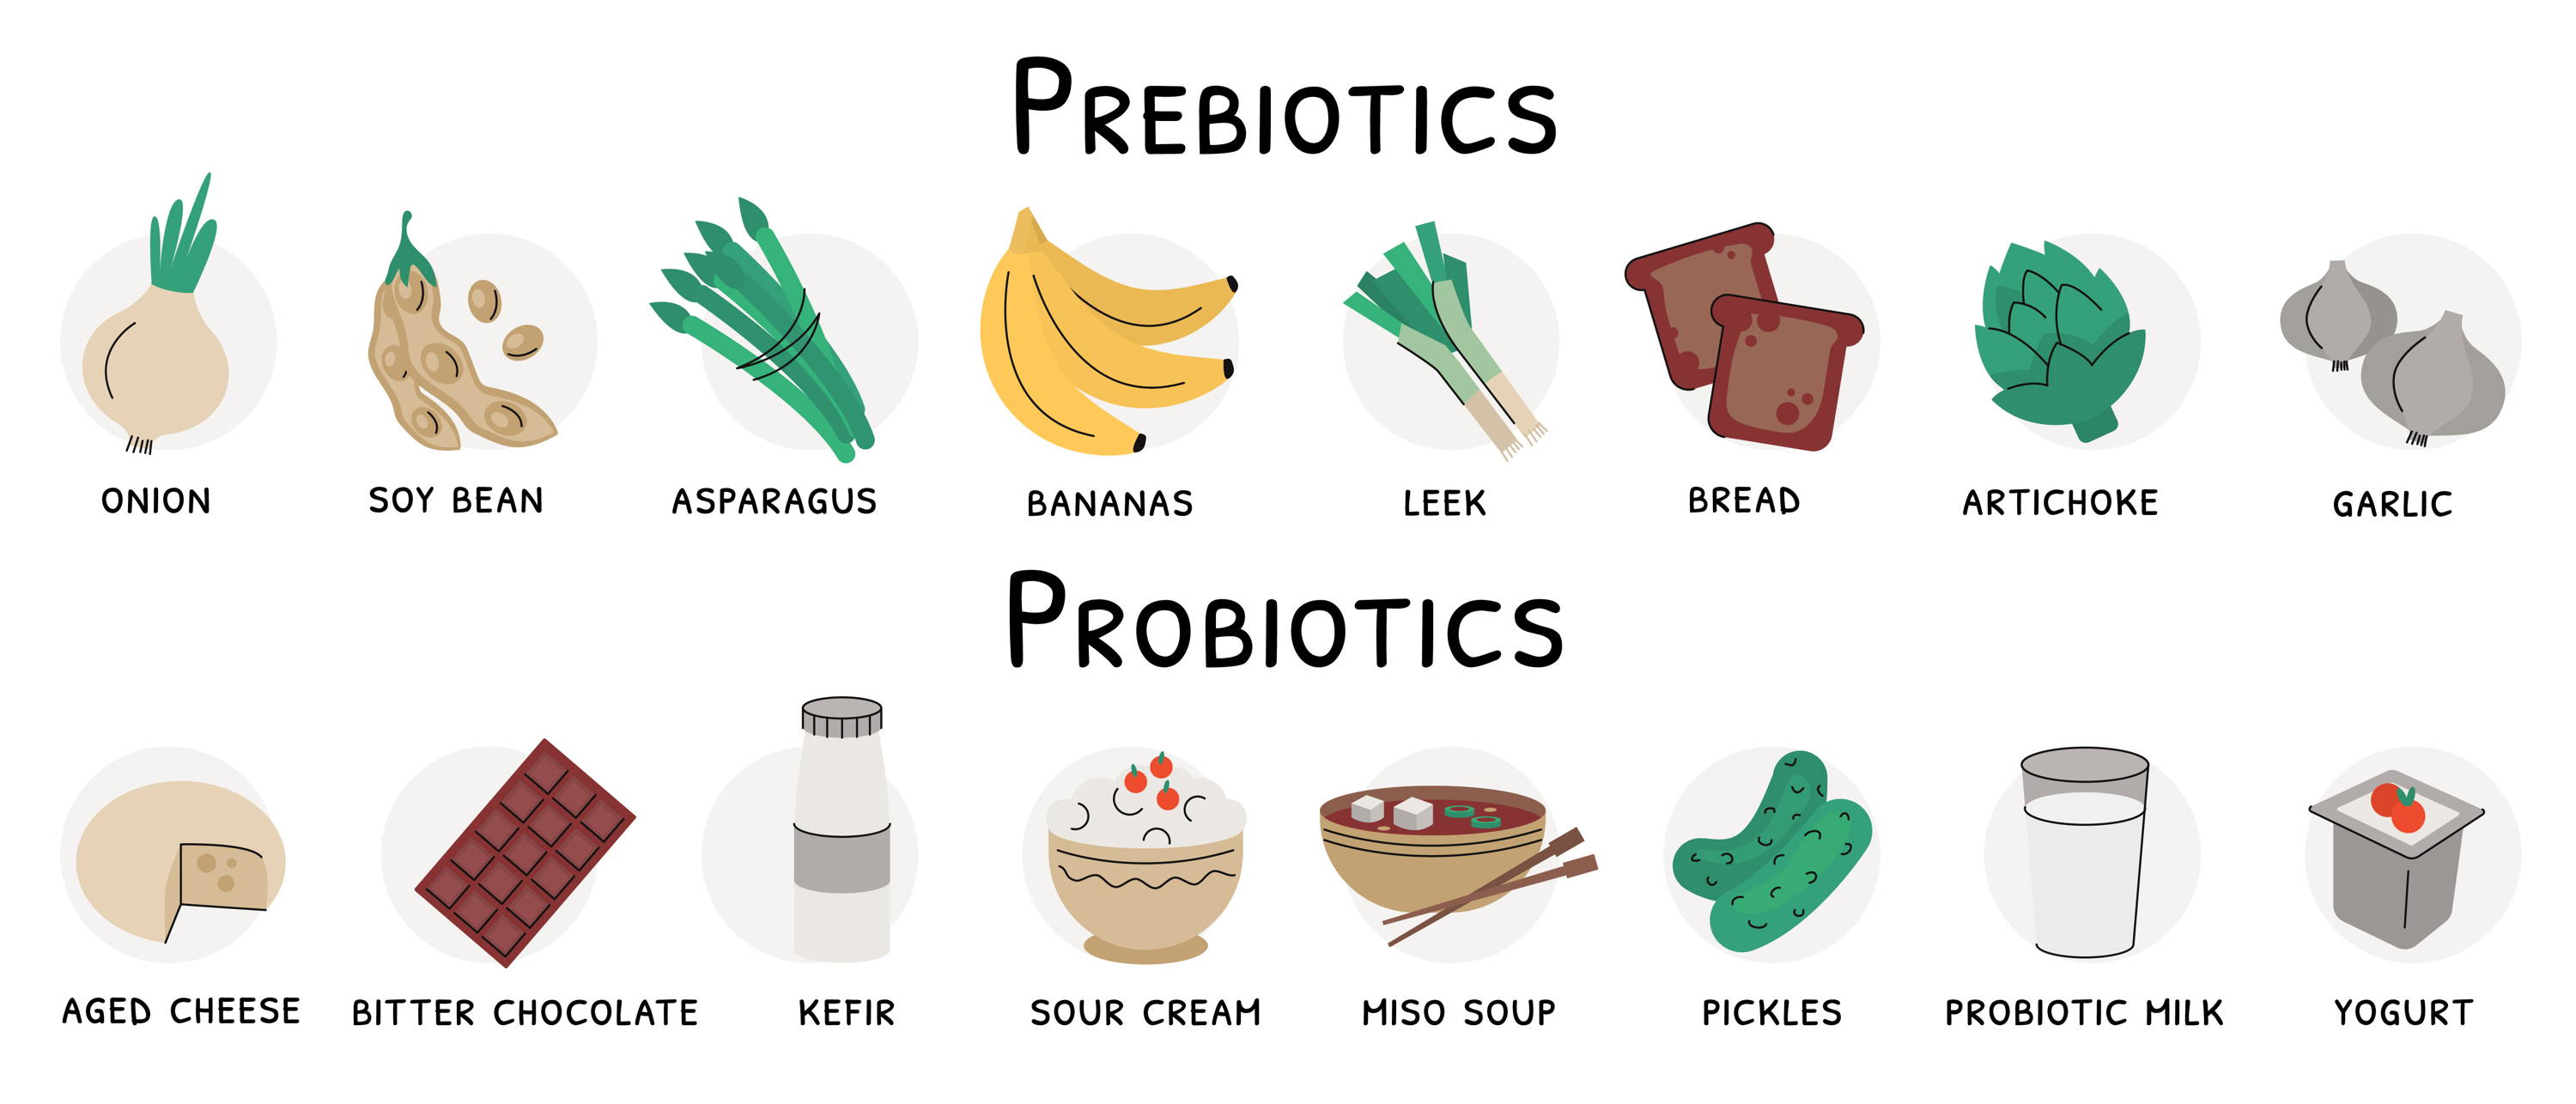 The facts on prebiotics and benefits of probiotic supplements